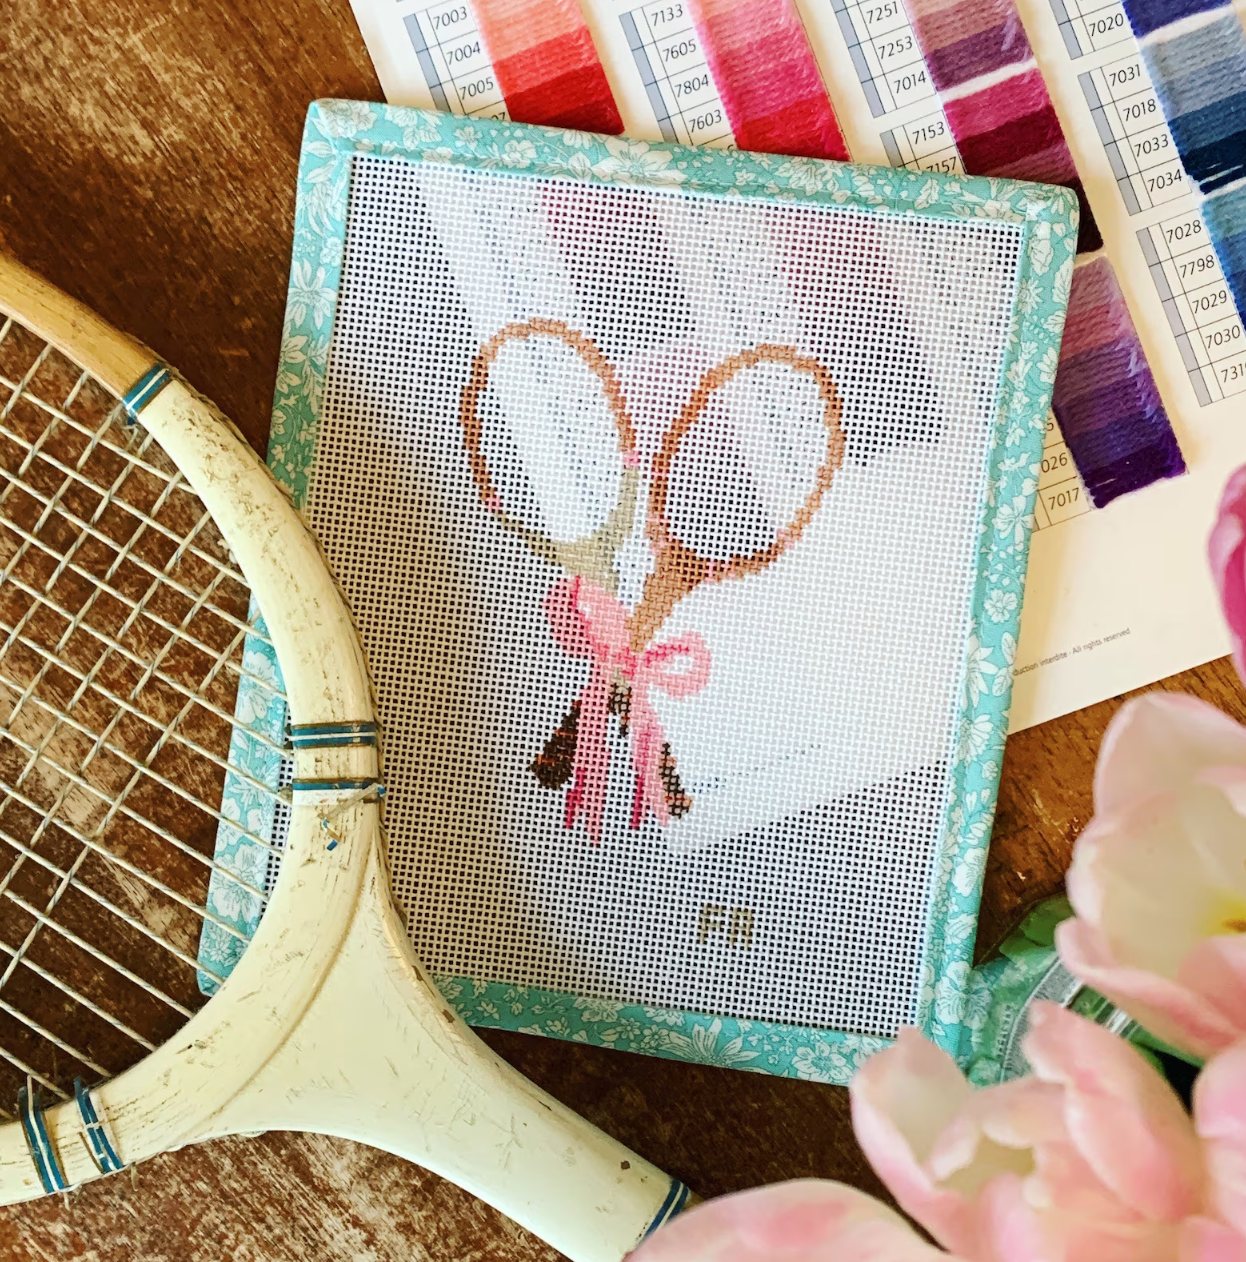 A styled scene shows a hand painted needlepoint canvas picture pair of tennis rackets.